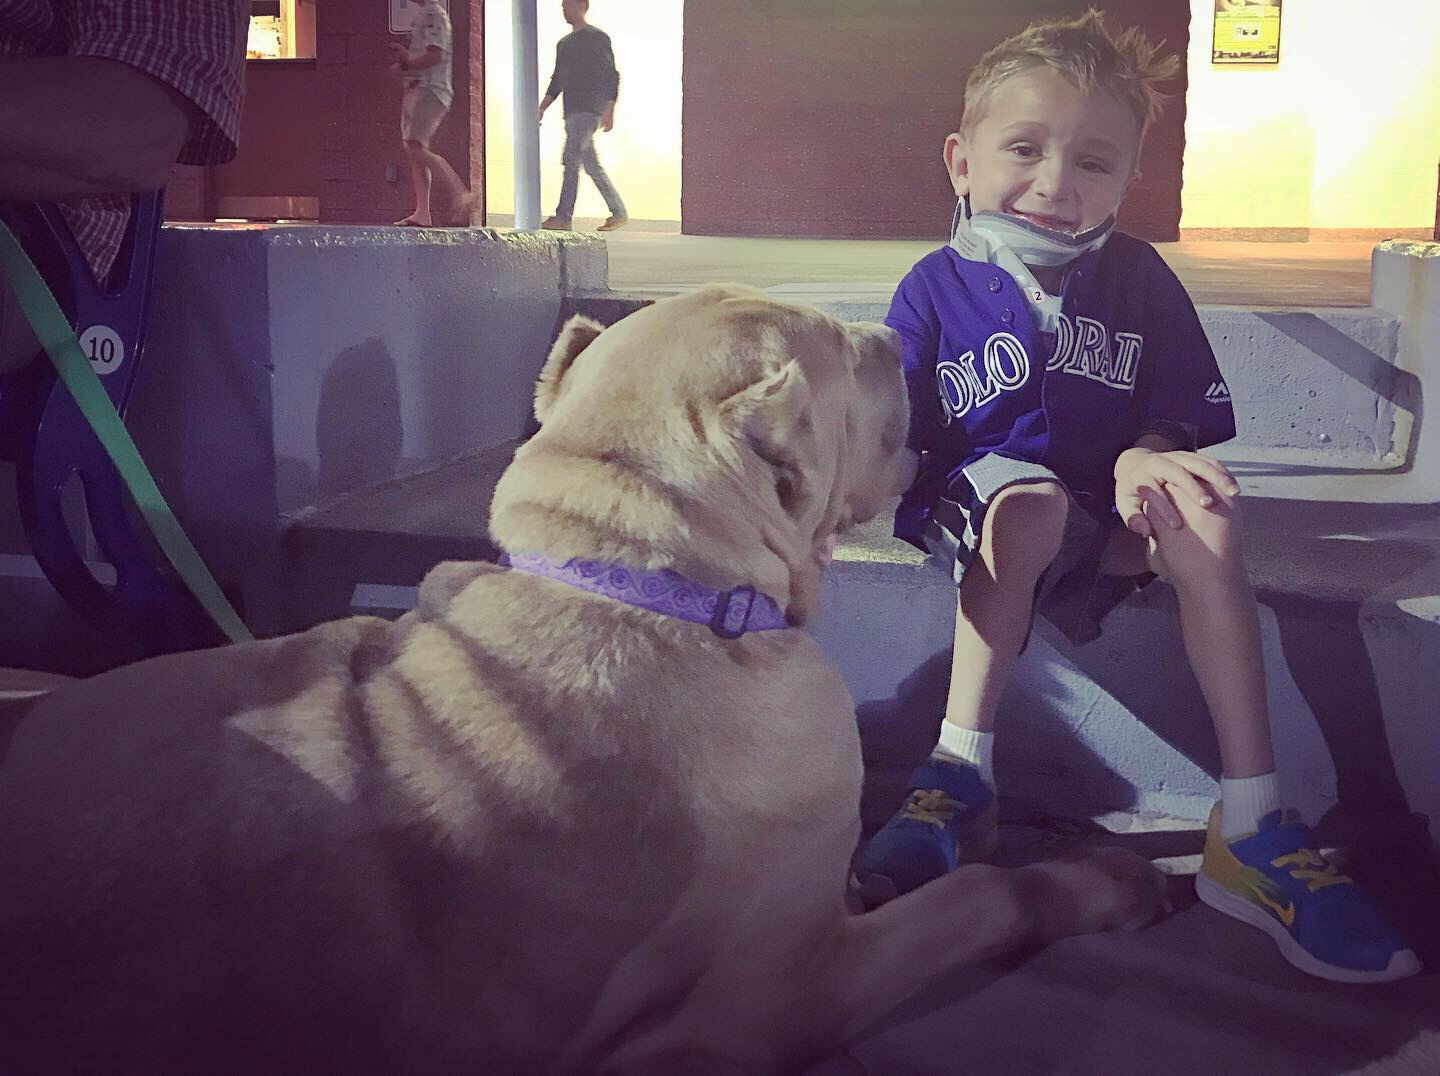 Coop made friends with Bear, a fellow baseball and popcorn fan. He’s also a therapy dog. 